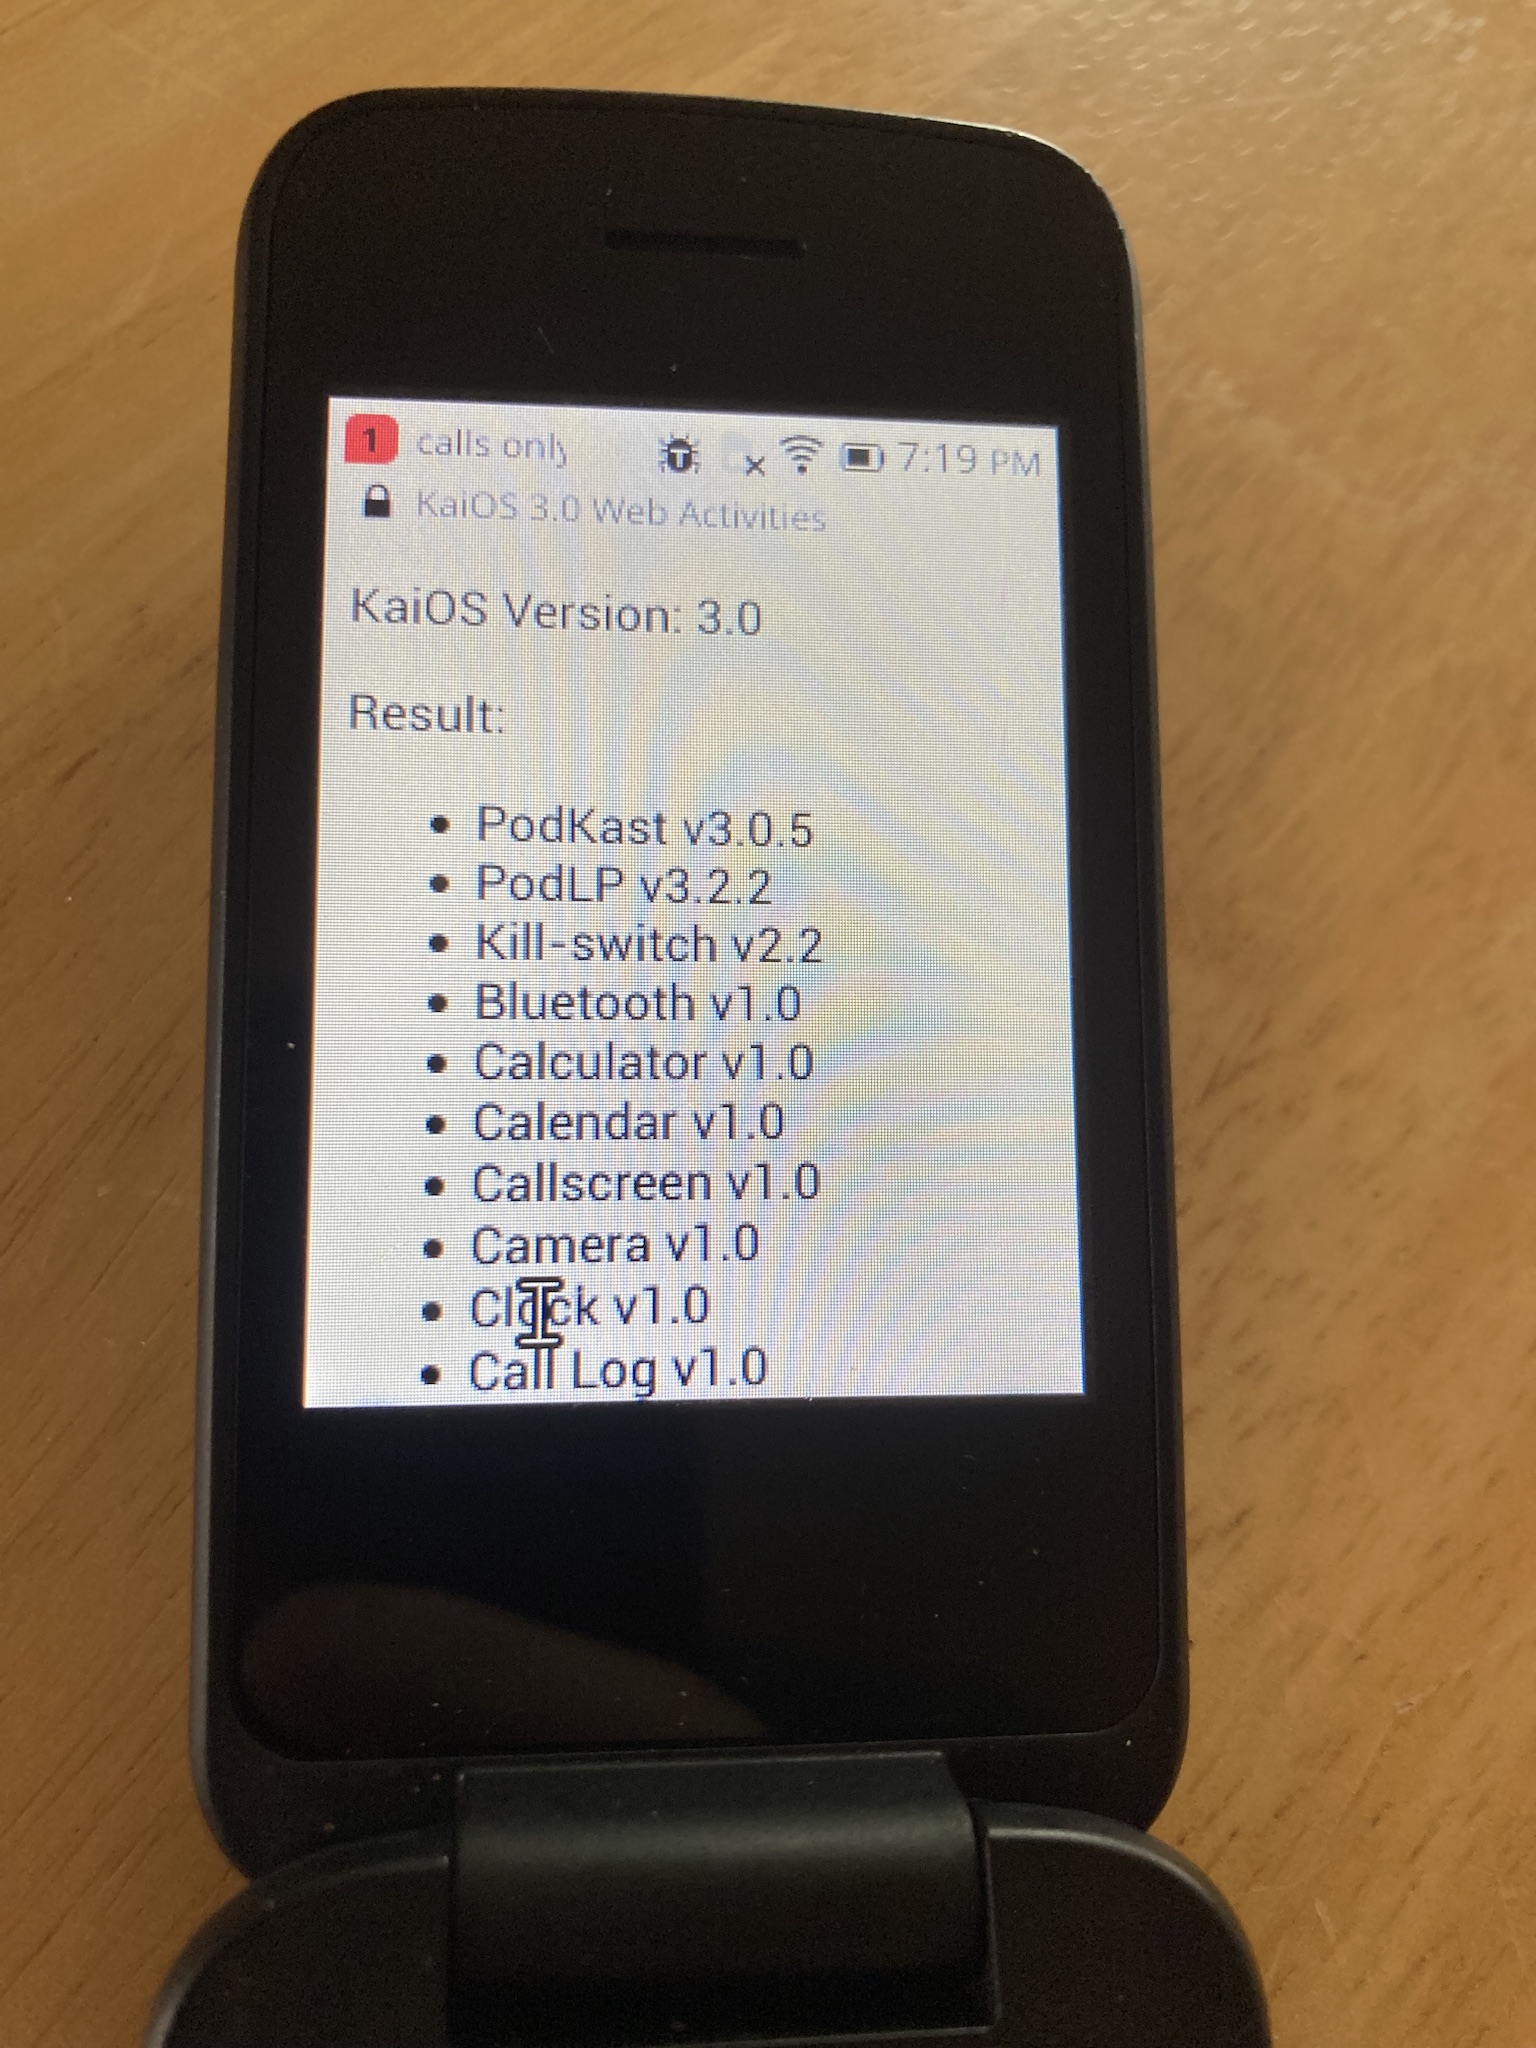 Photo of app list with versions exposed on Alcatel Go Flip 4 (KaiOS 3.0) browser